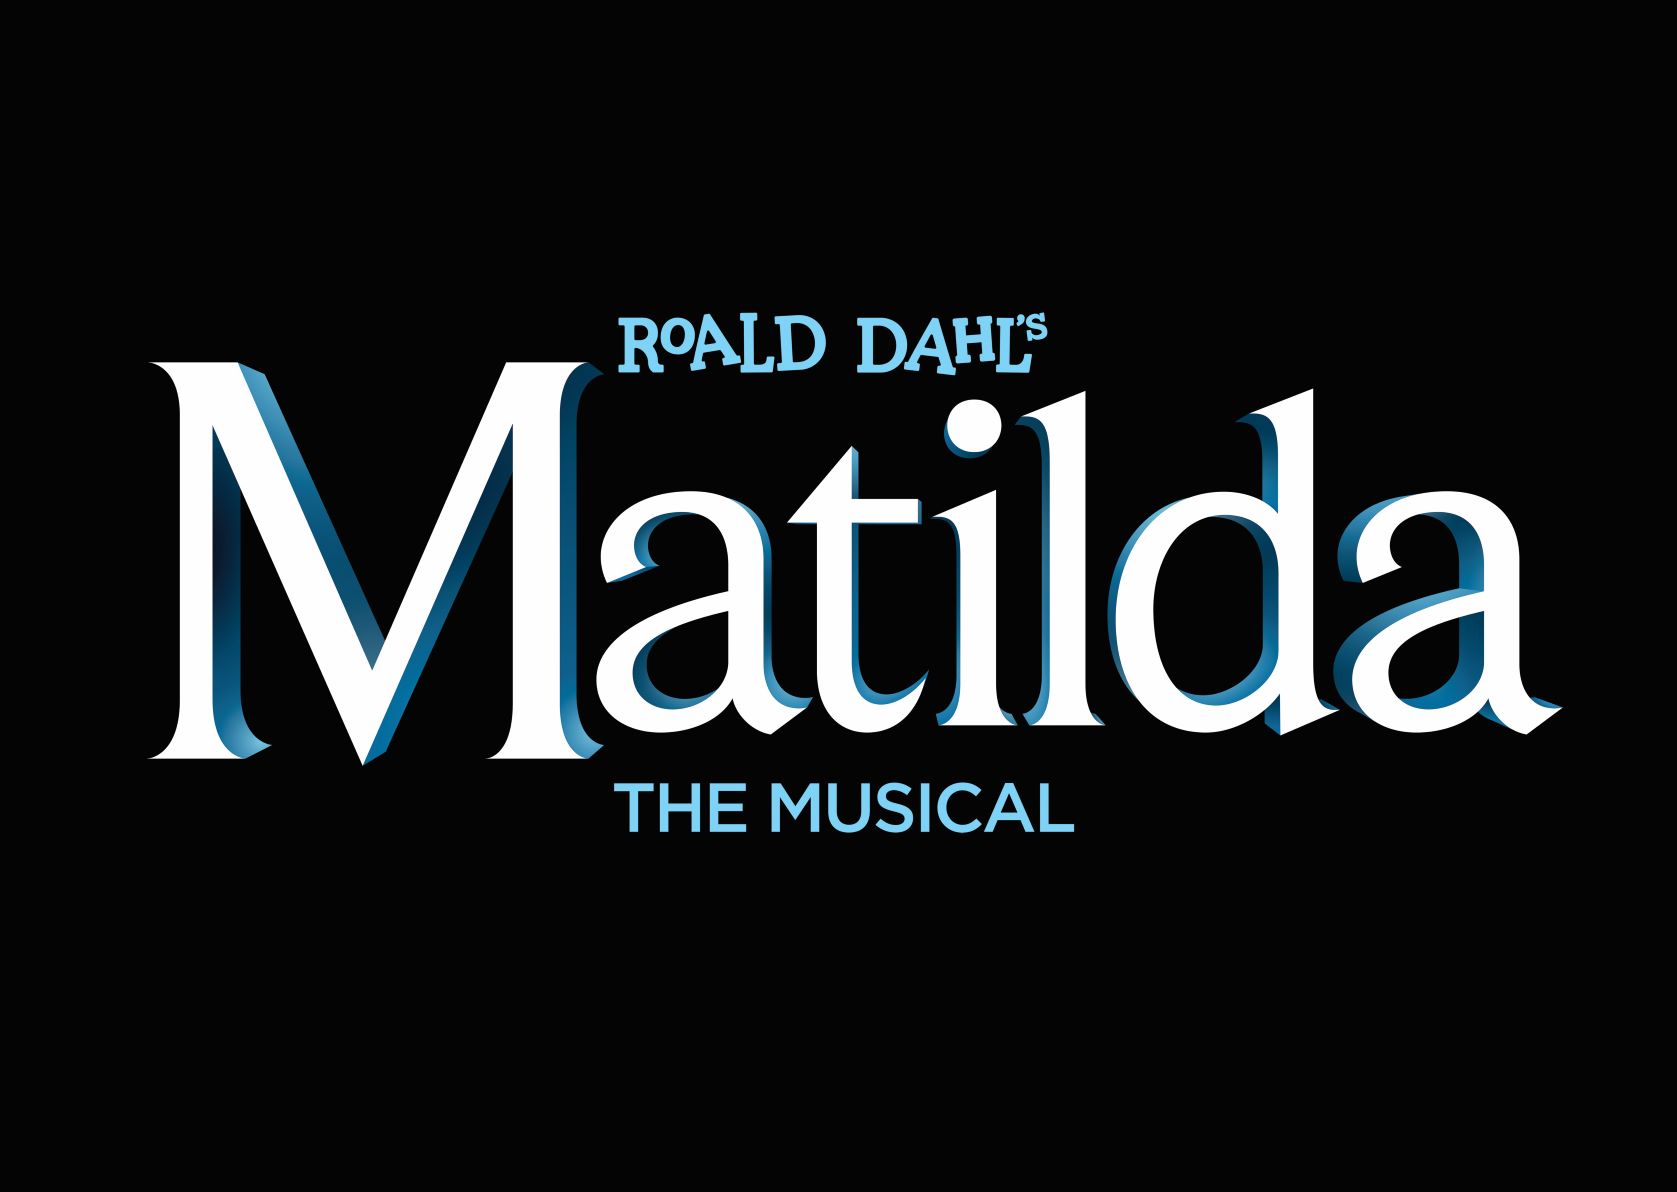 Enter to win 4 x Tickets to see the international smash hit LIVE experience Matilda – The Musical at Artscape Theatre, Cape Town